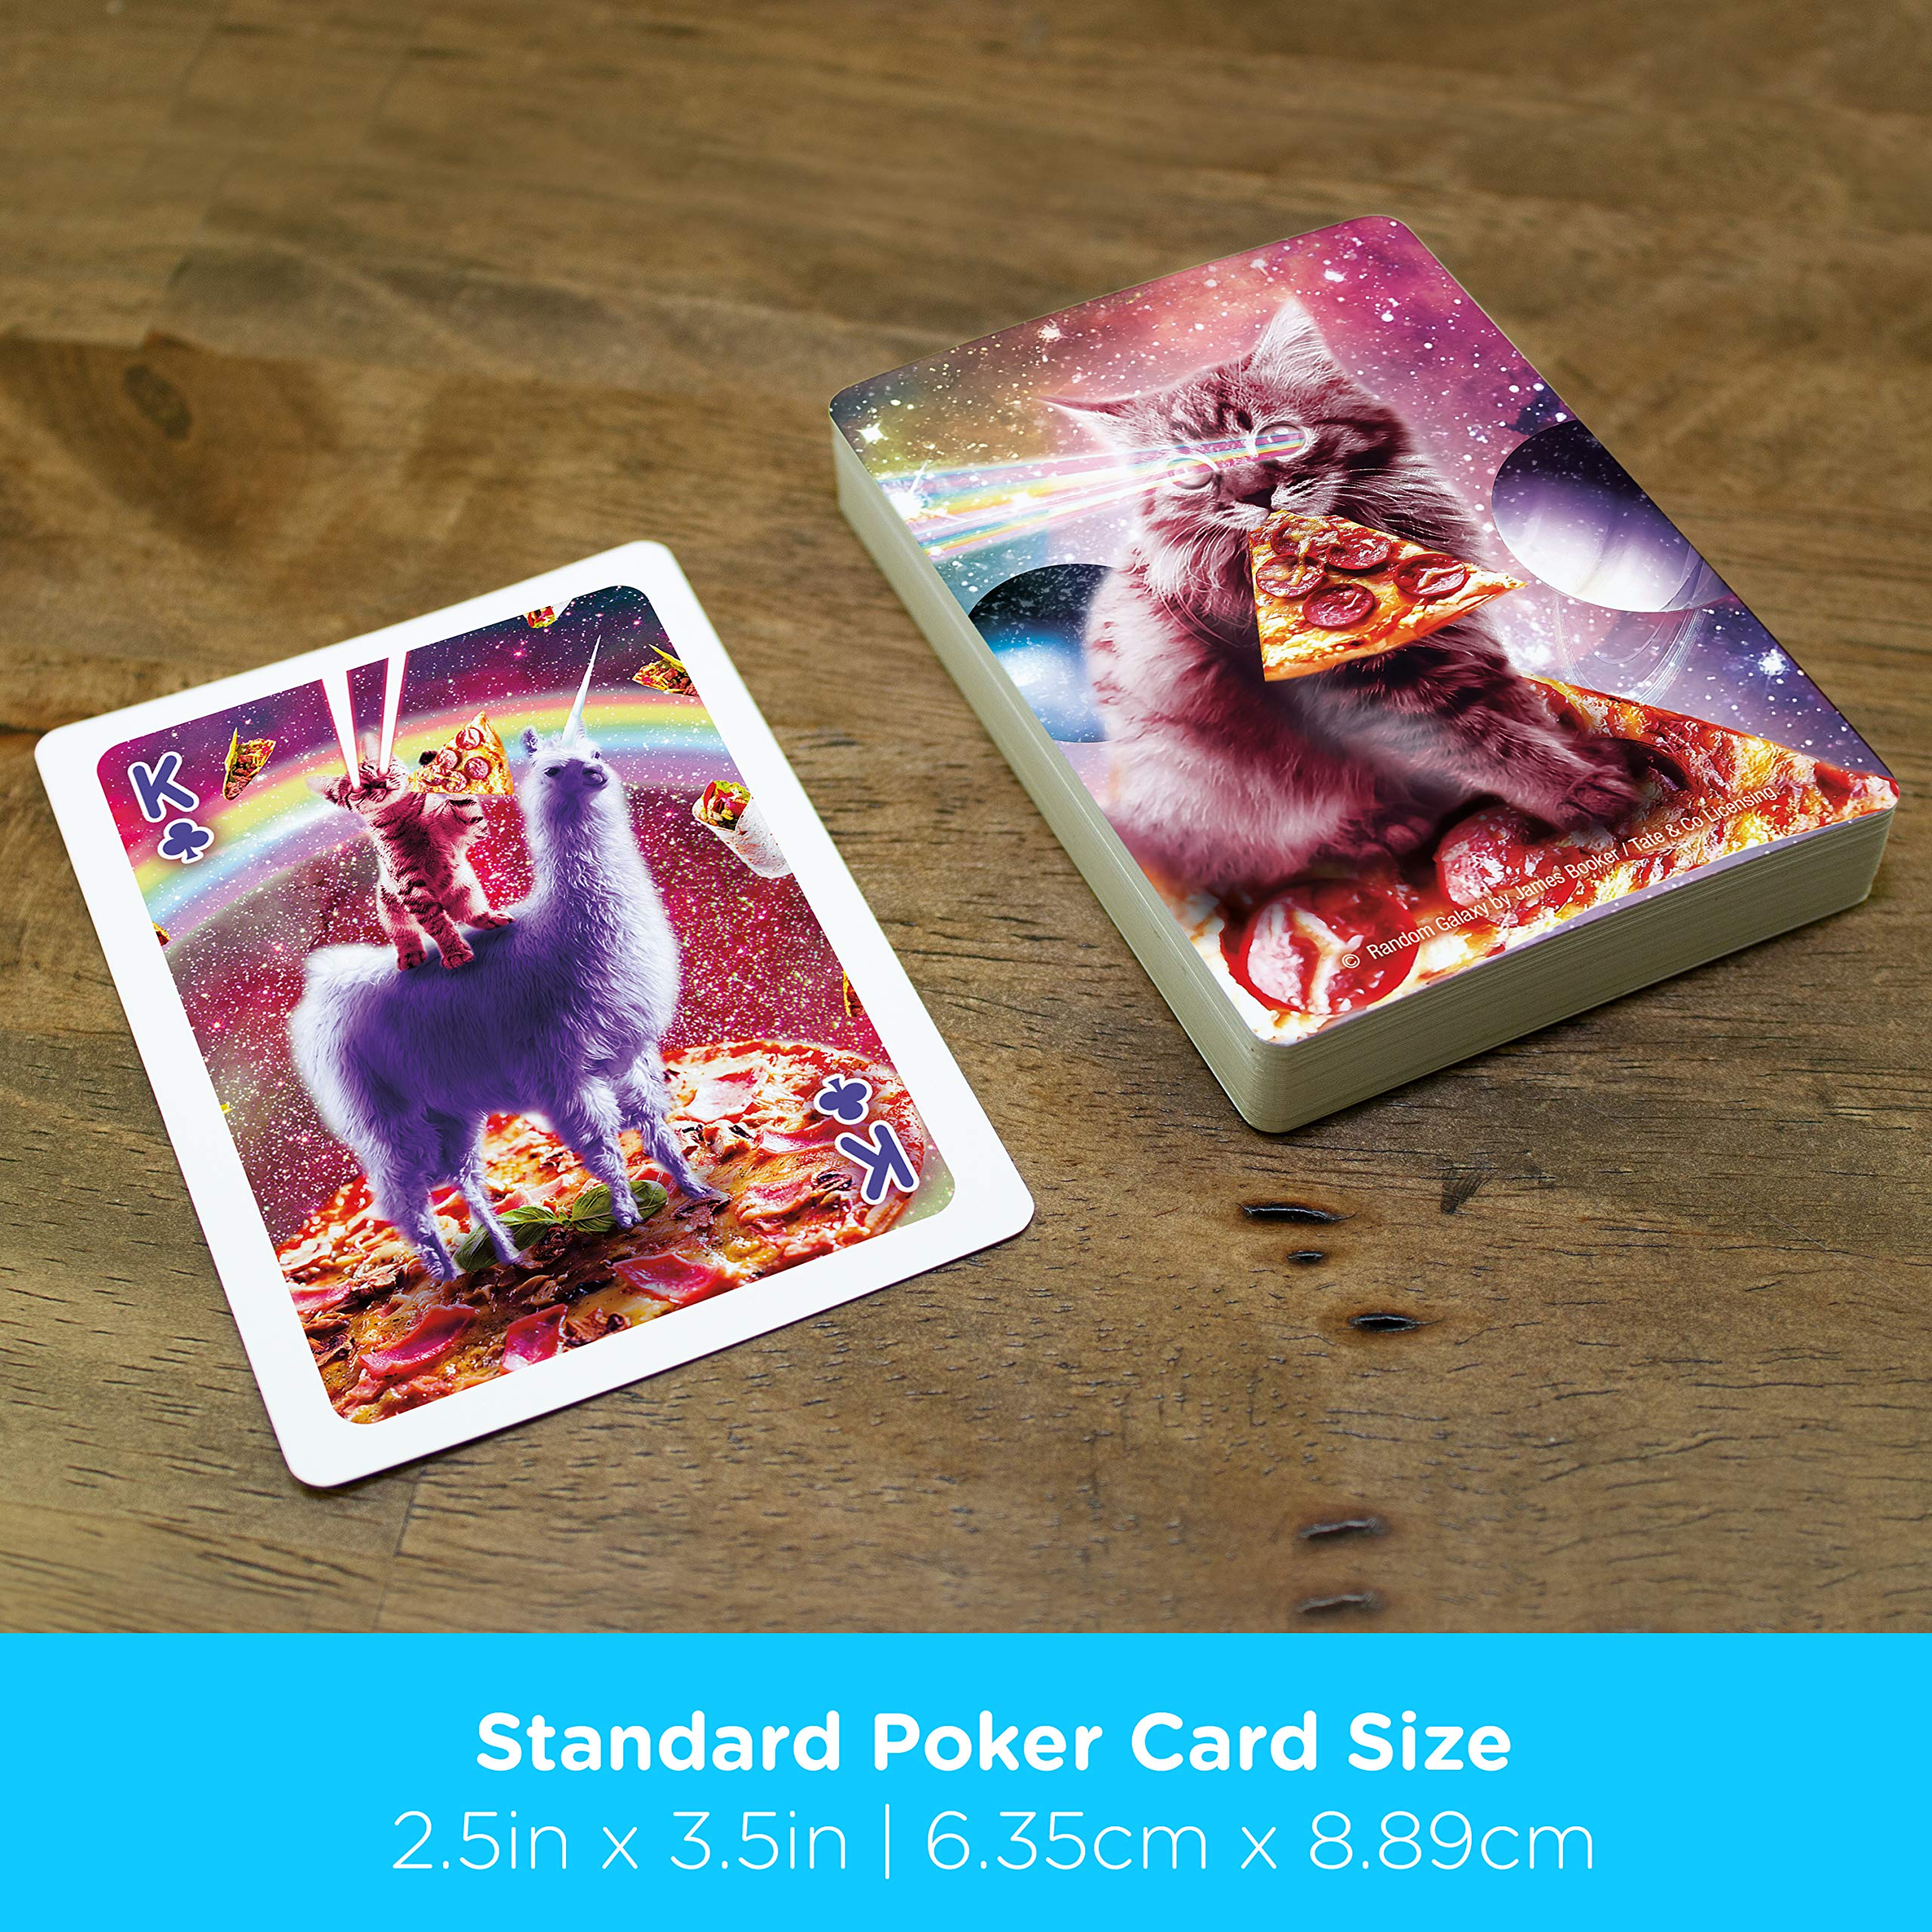 AQUARIUS Random Galaxy Playing Cards - Sloths, Llamas, Cats, Lasers & More - Themed Deck of Cards for Your Favorite Card Games - Officially Licensed Merchandise & Collectibles